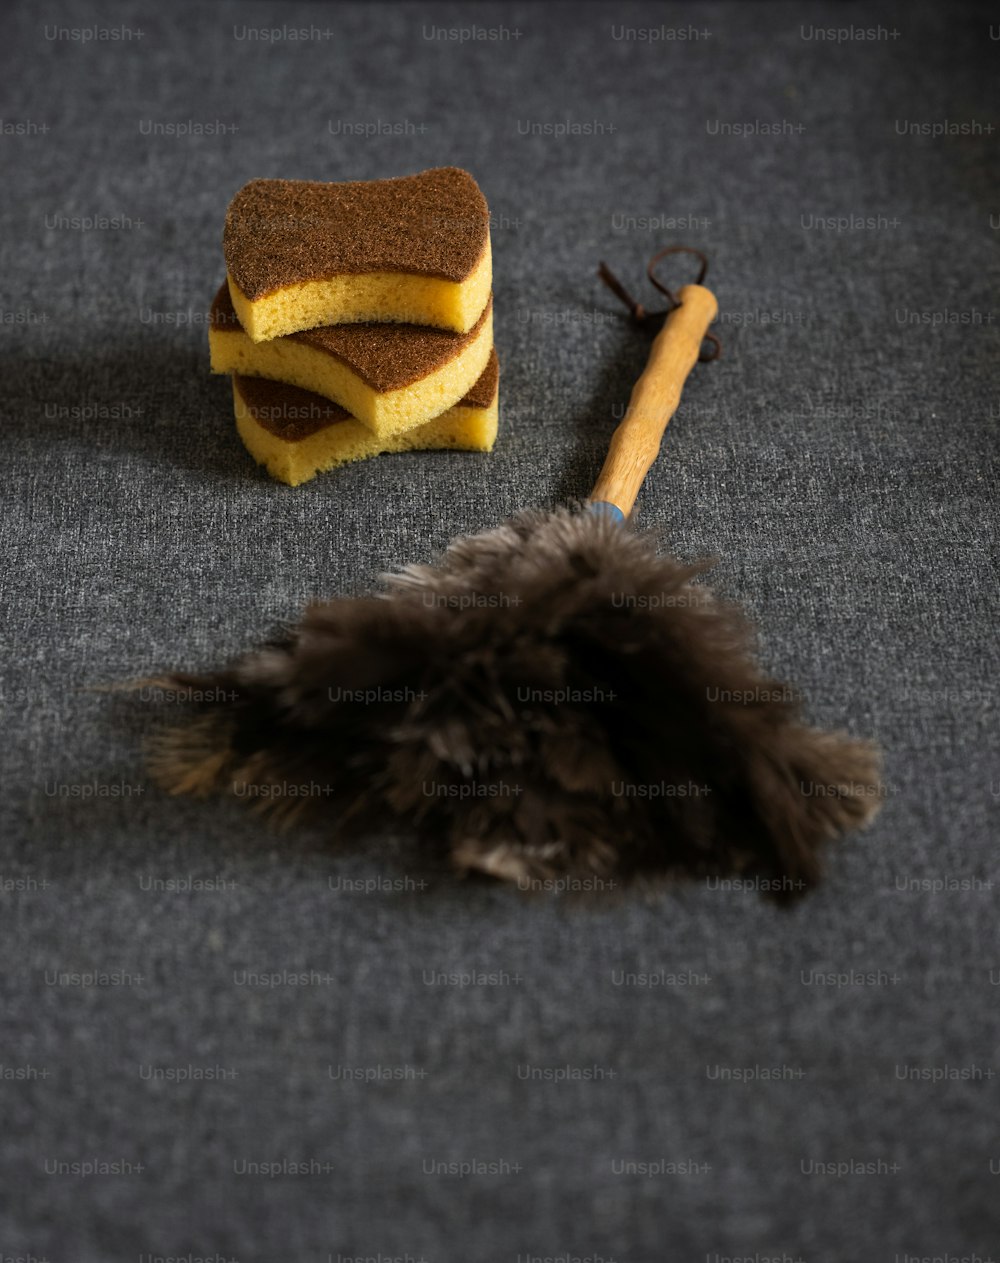 a piece of bread and a cigarette on a carpet